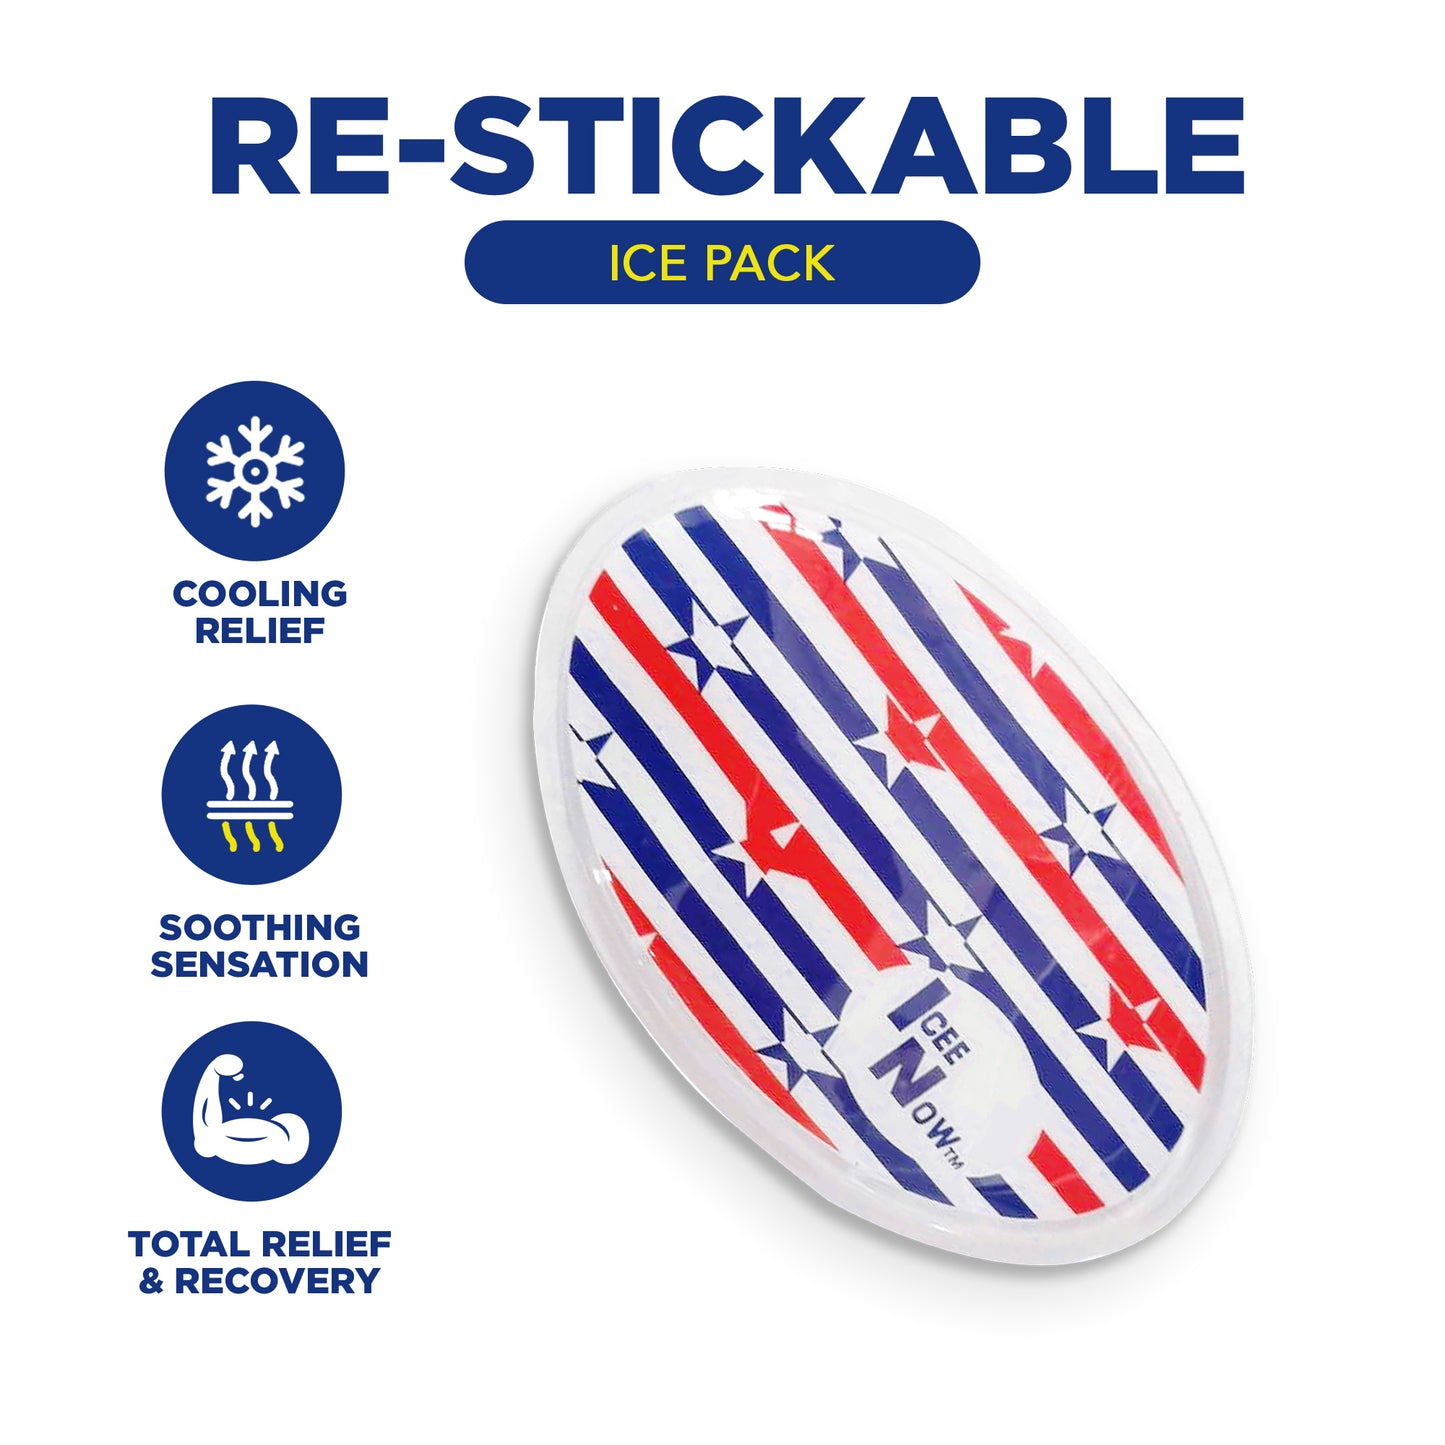 Icee Packs - Re-Stickable up to 100 times - 12 pk Mix 'n Match